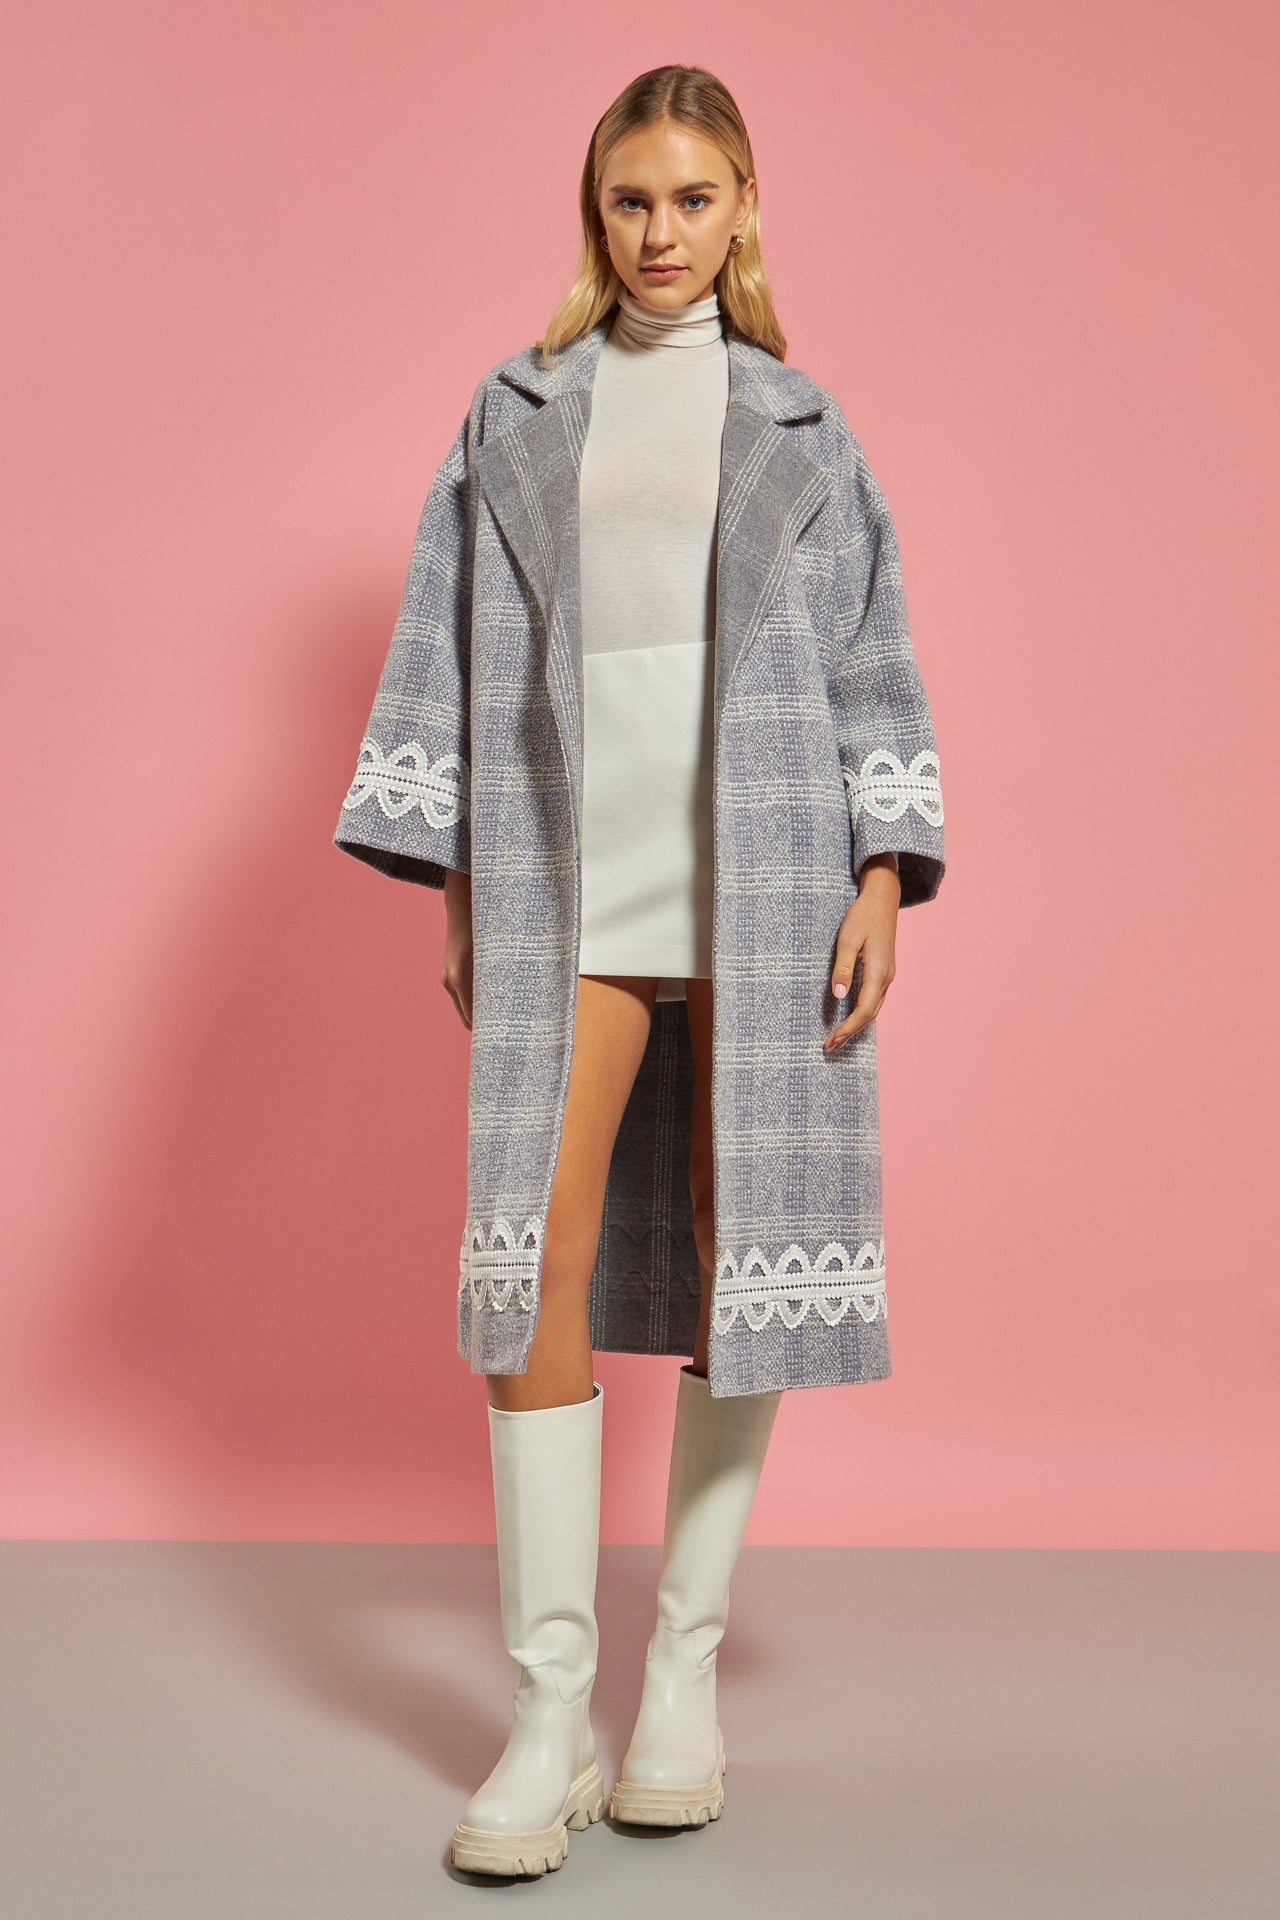 ENGLISH FACTORY - Premium Long Plaid Wrap Coat - COATS available at Objectrare